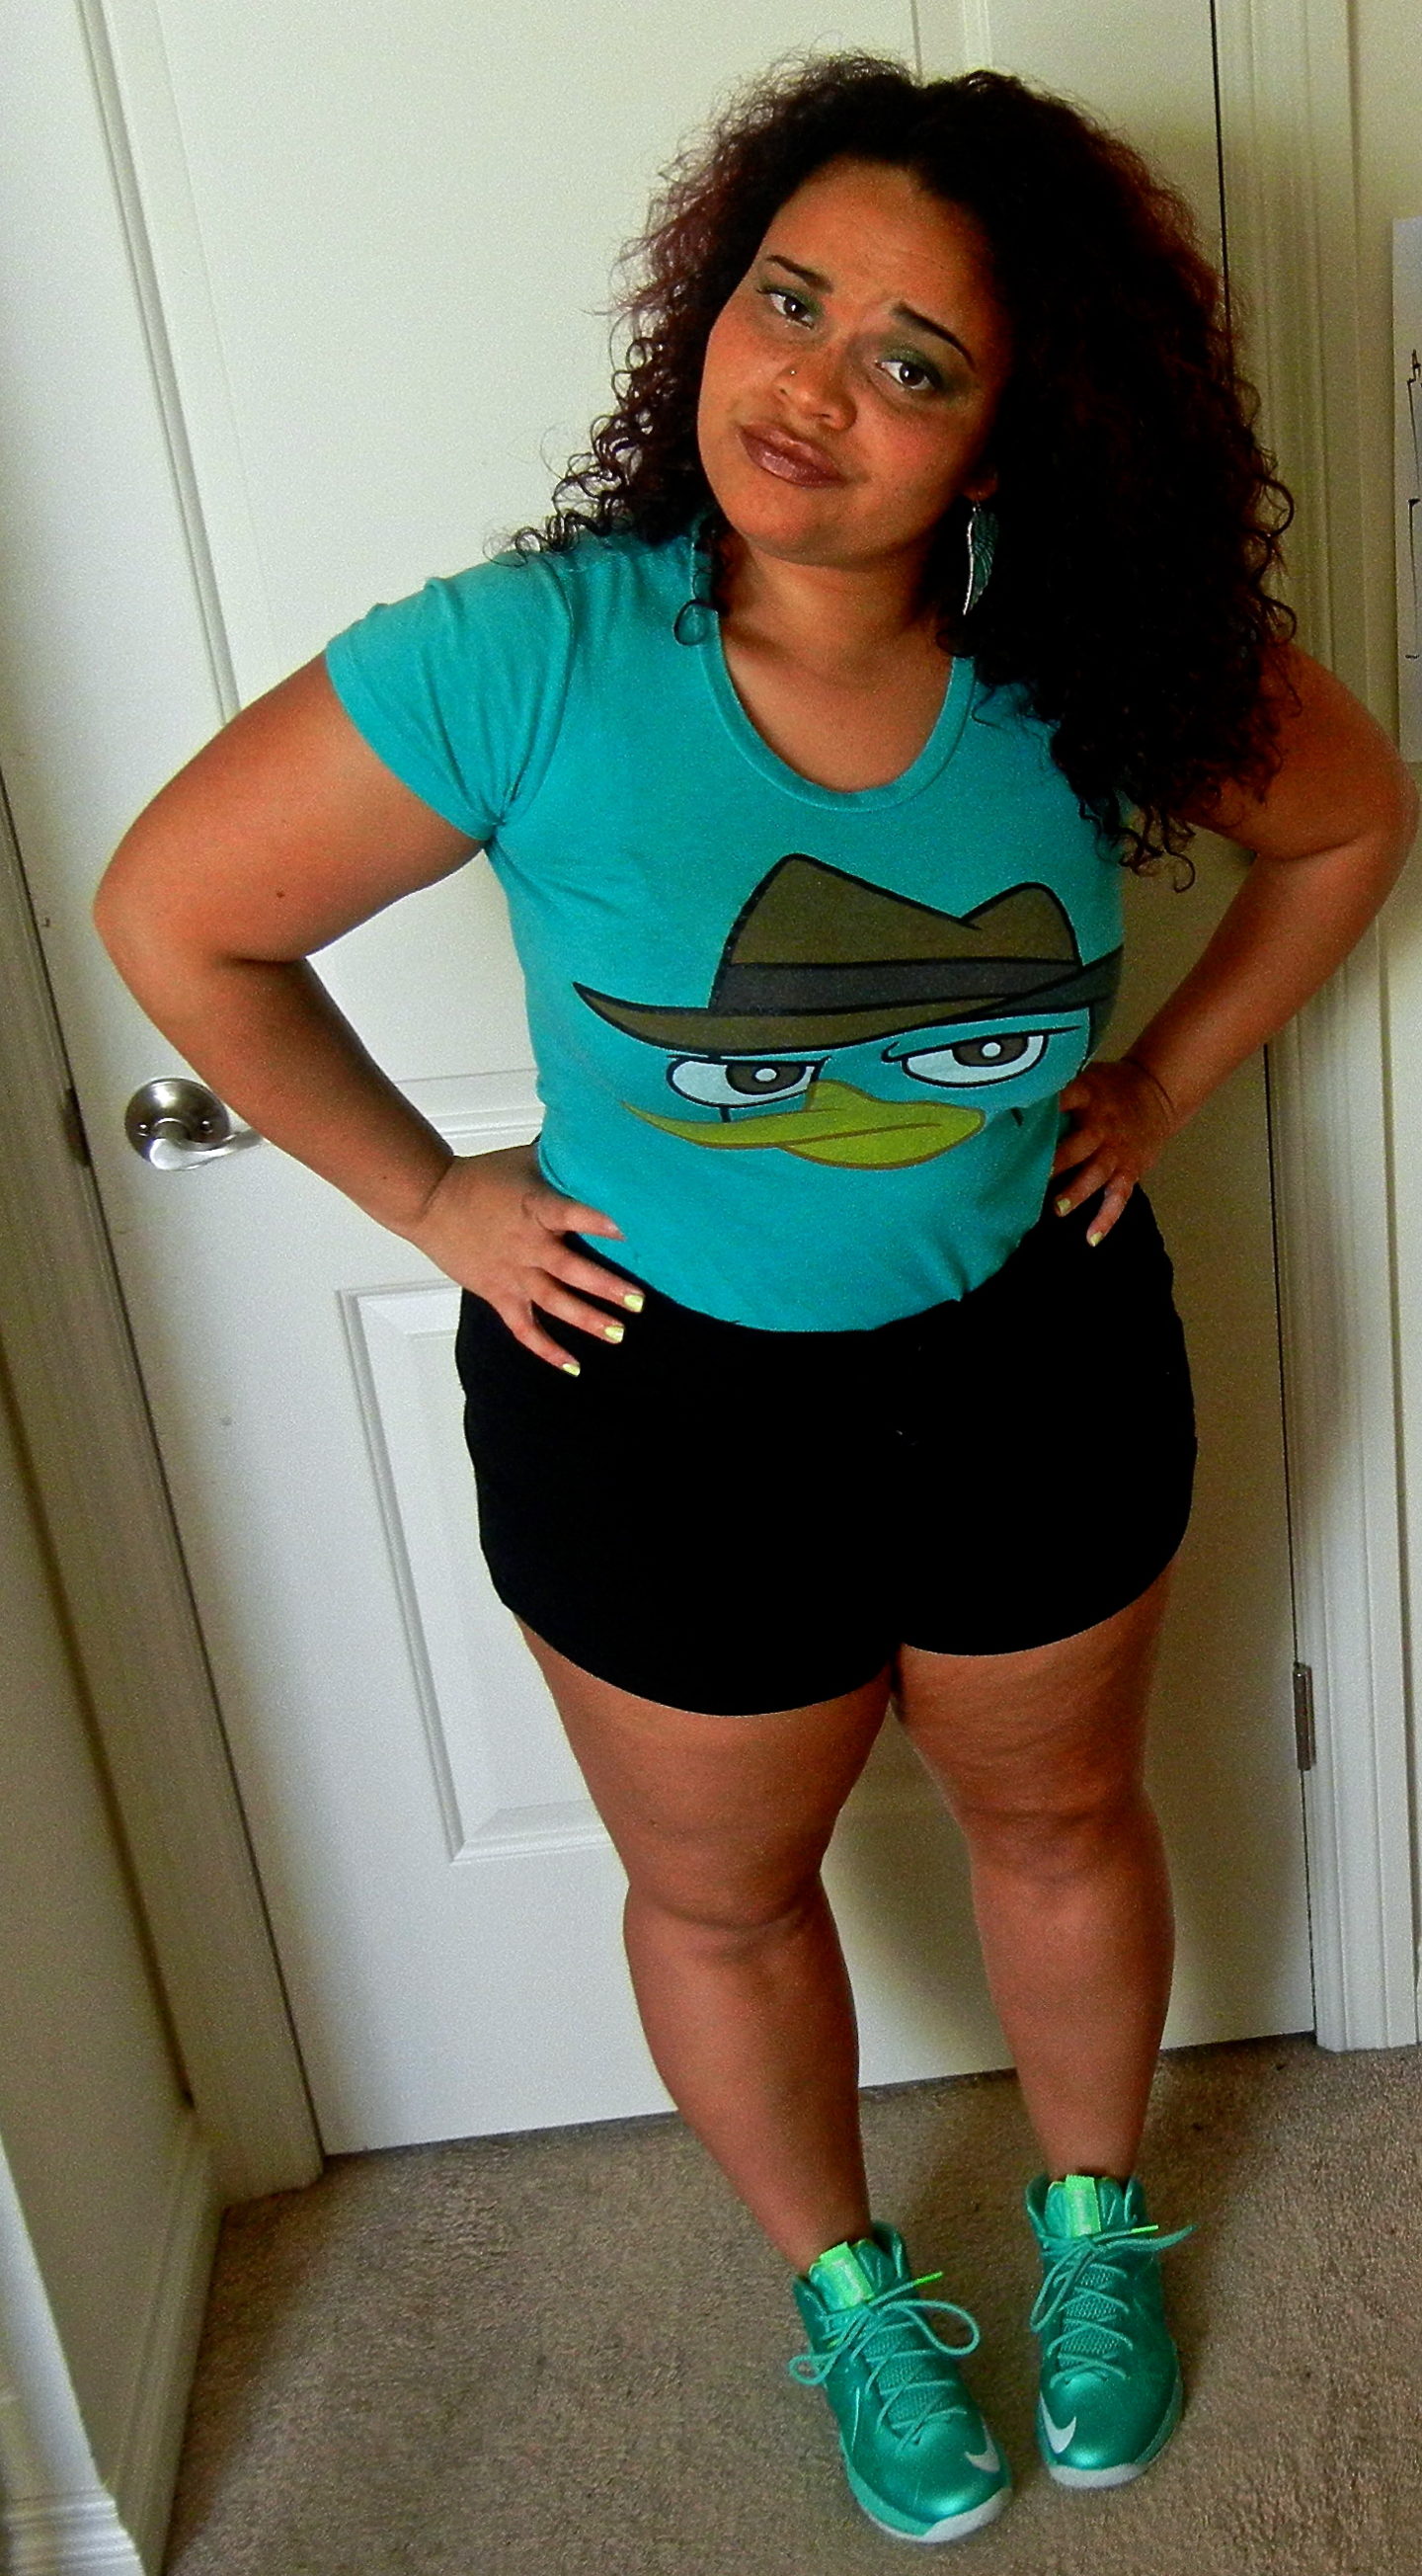 OOTD: Where’s Perry?